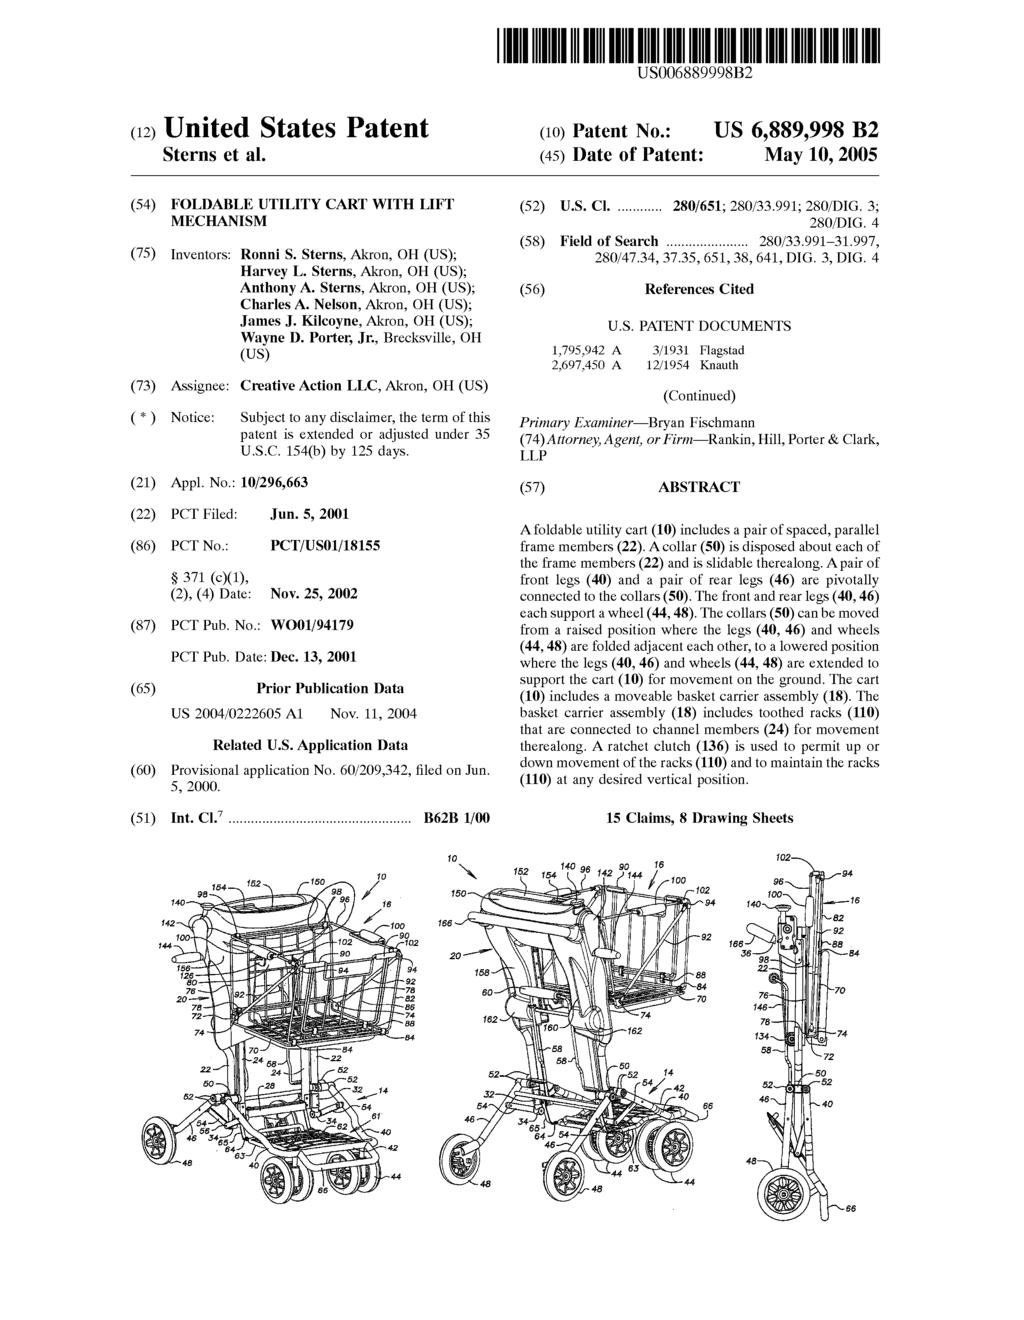 USOO6889998B2 (12) United States Patent (10) Patent No.: Sterns et al. (45) Date of Patent: May 10, 2005 (54) FOLDABLE UTILITY CART WITH LIFT (52) U.S. Cl.... 280/651; 280/33.991; 280/DIG.